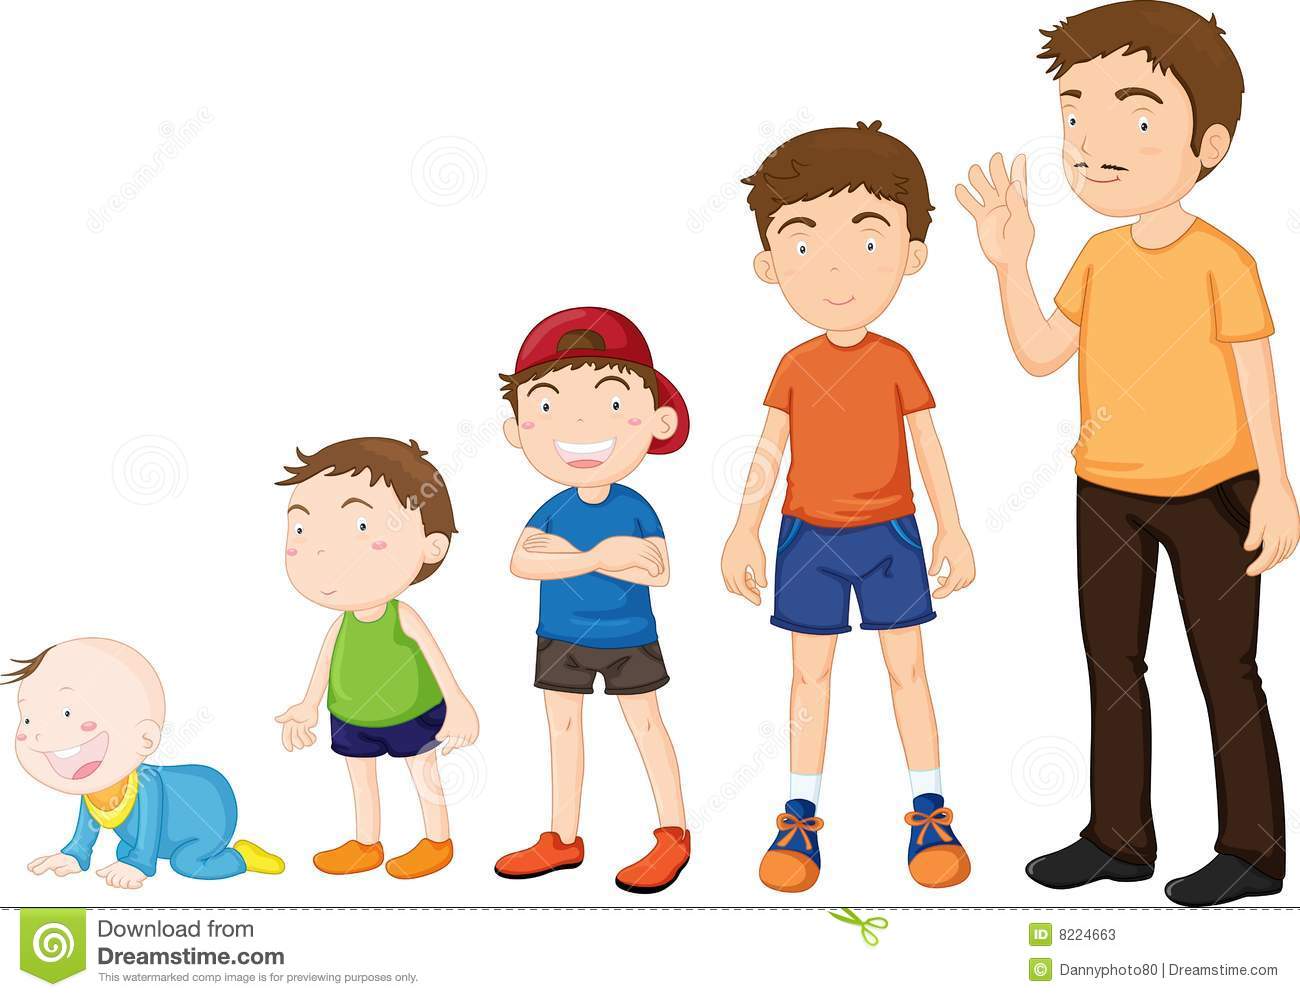 Illustration Of Stages Of Growing Up From Baby To Man